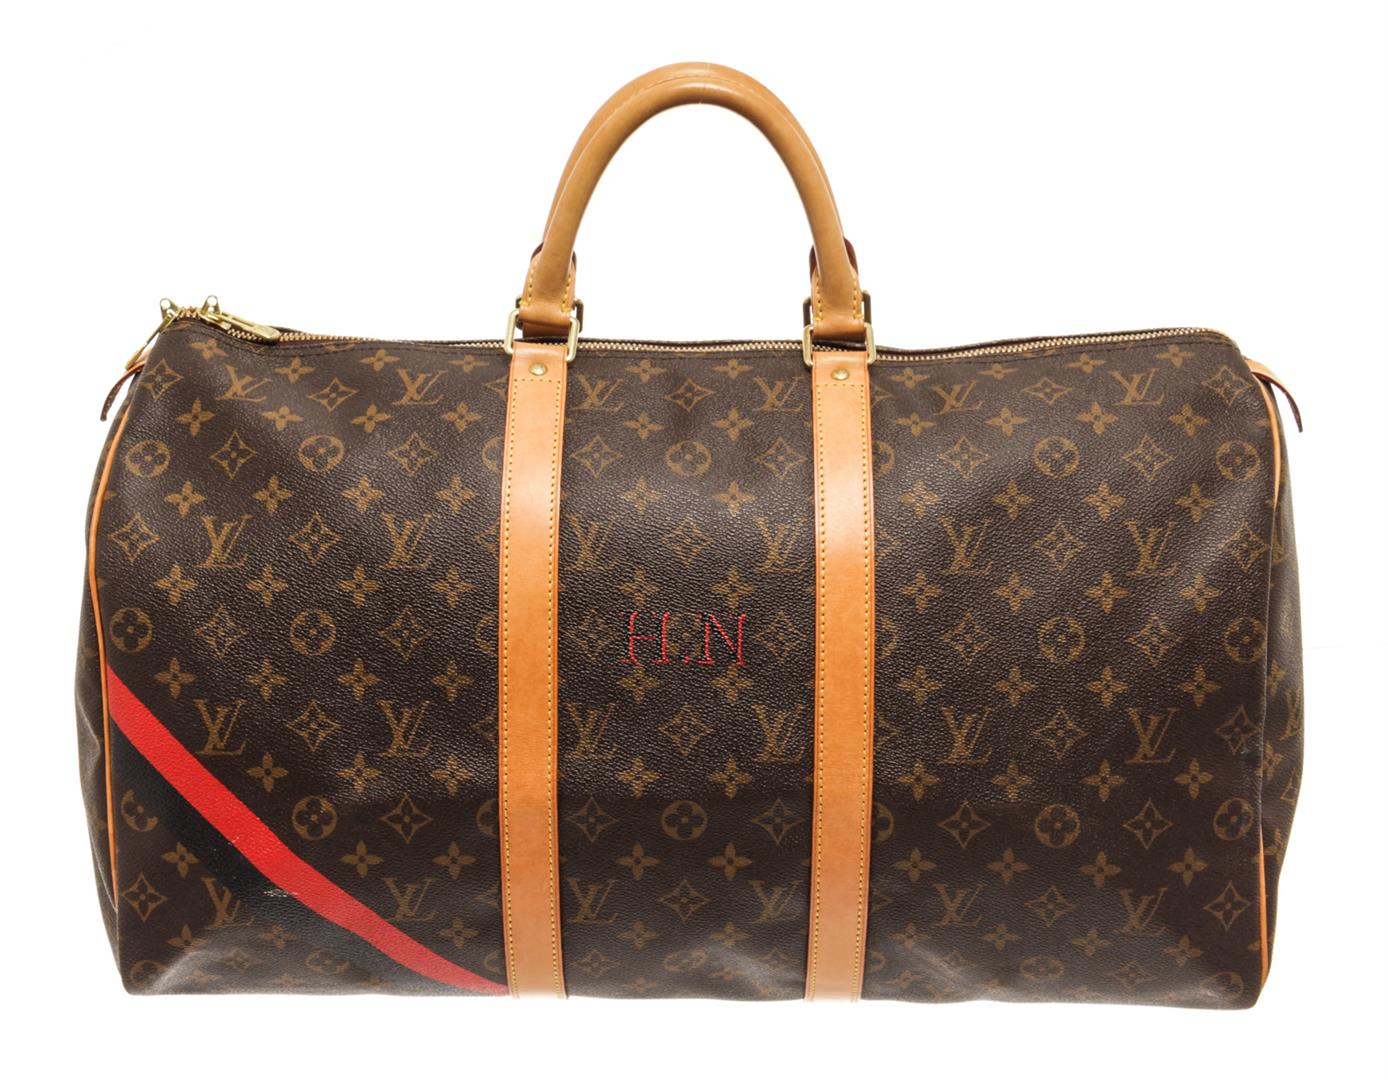 The Louis Vuitton Keepall Bag Has Endless Potential